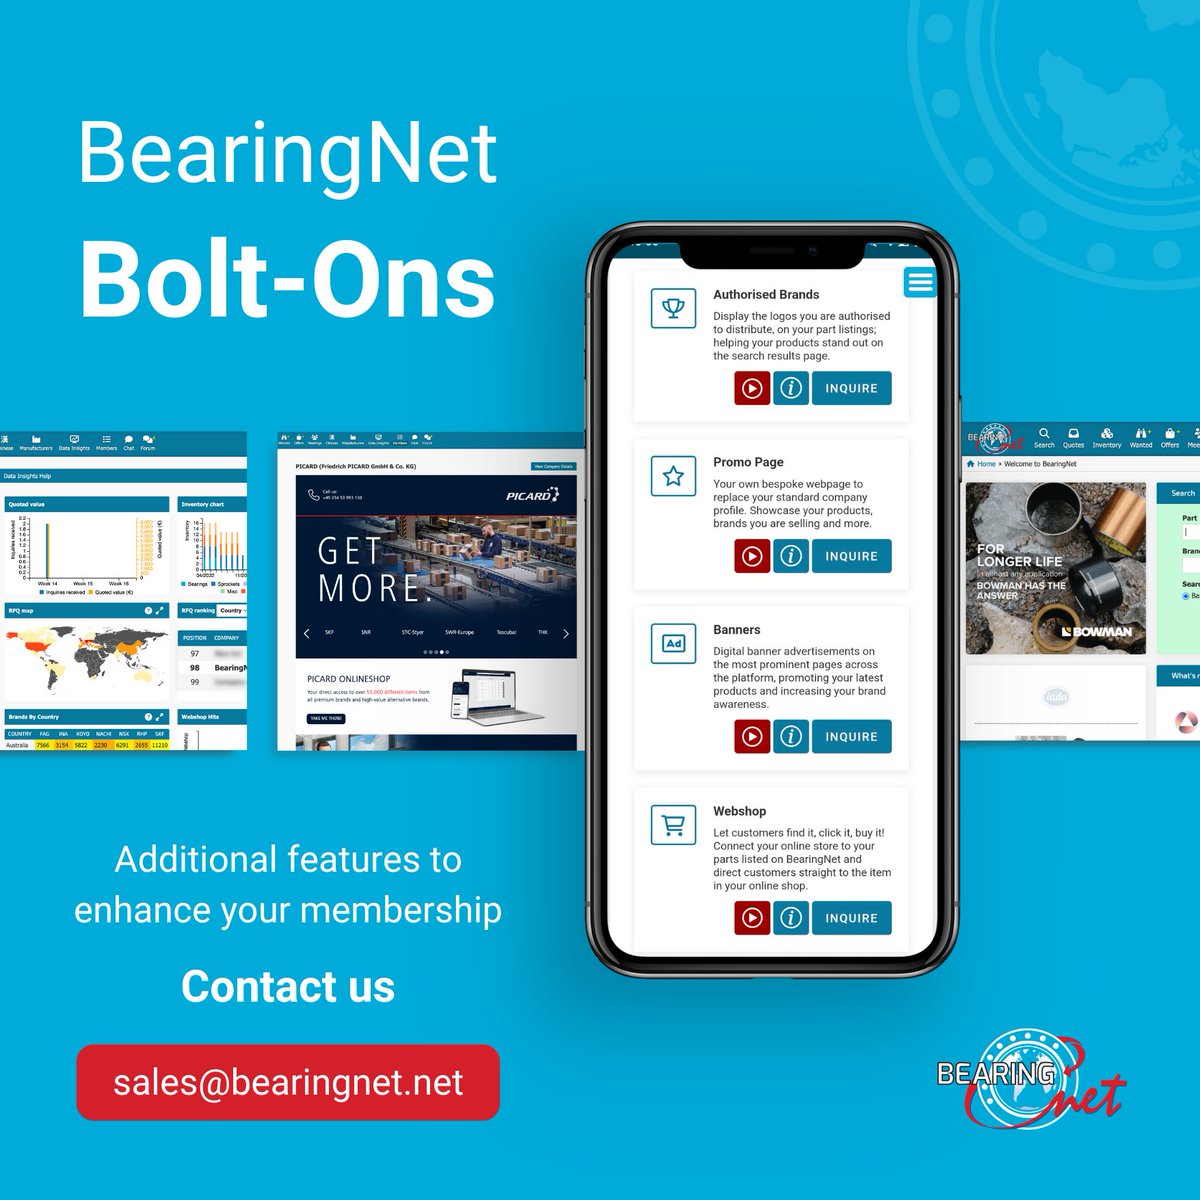 Are you benefiting from any of the additional features available alongside your BearingNet membership? See what is on offer by visiting the Bolt-Ons page here ➡️ members.bearingnet.net/General/Boltons #bearingnet #bearings #powertransmission #webshop #distributors